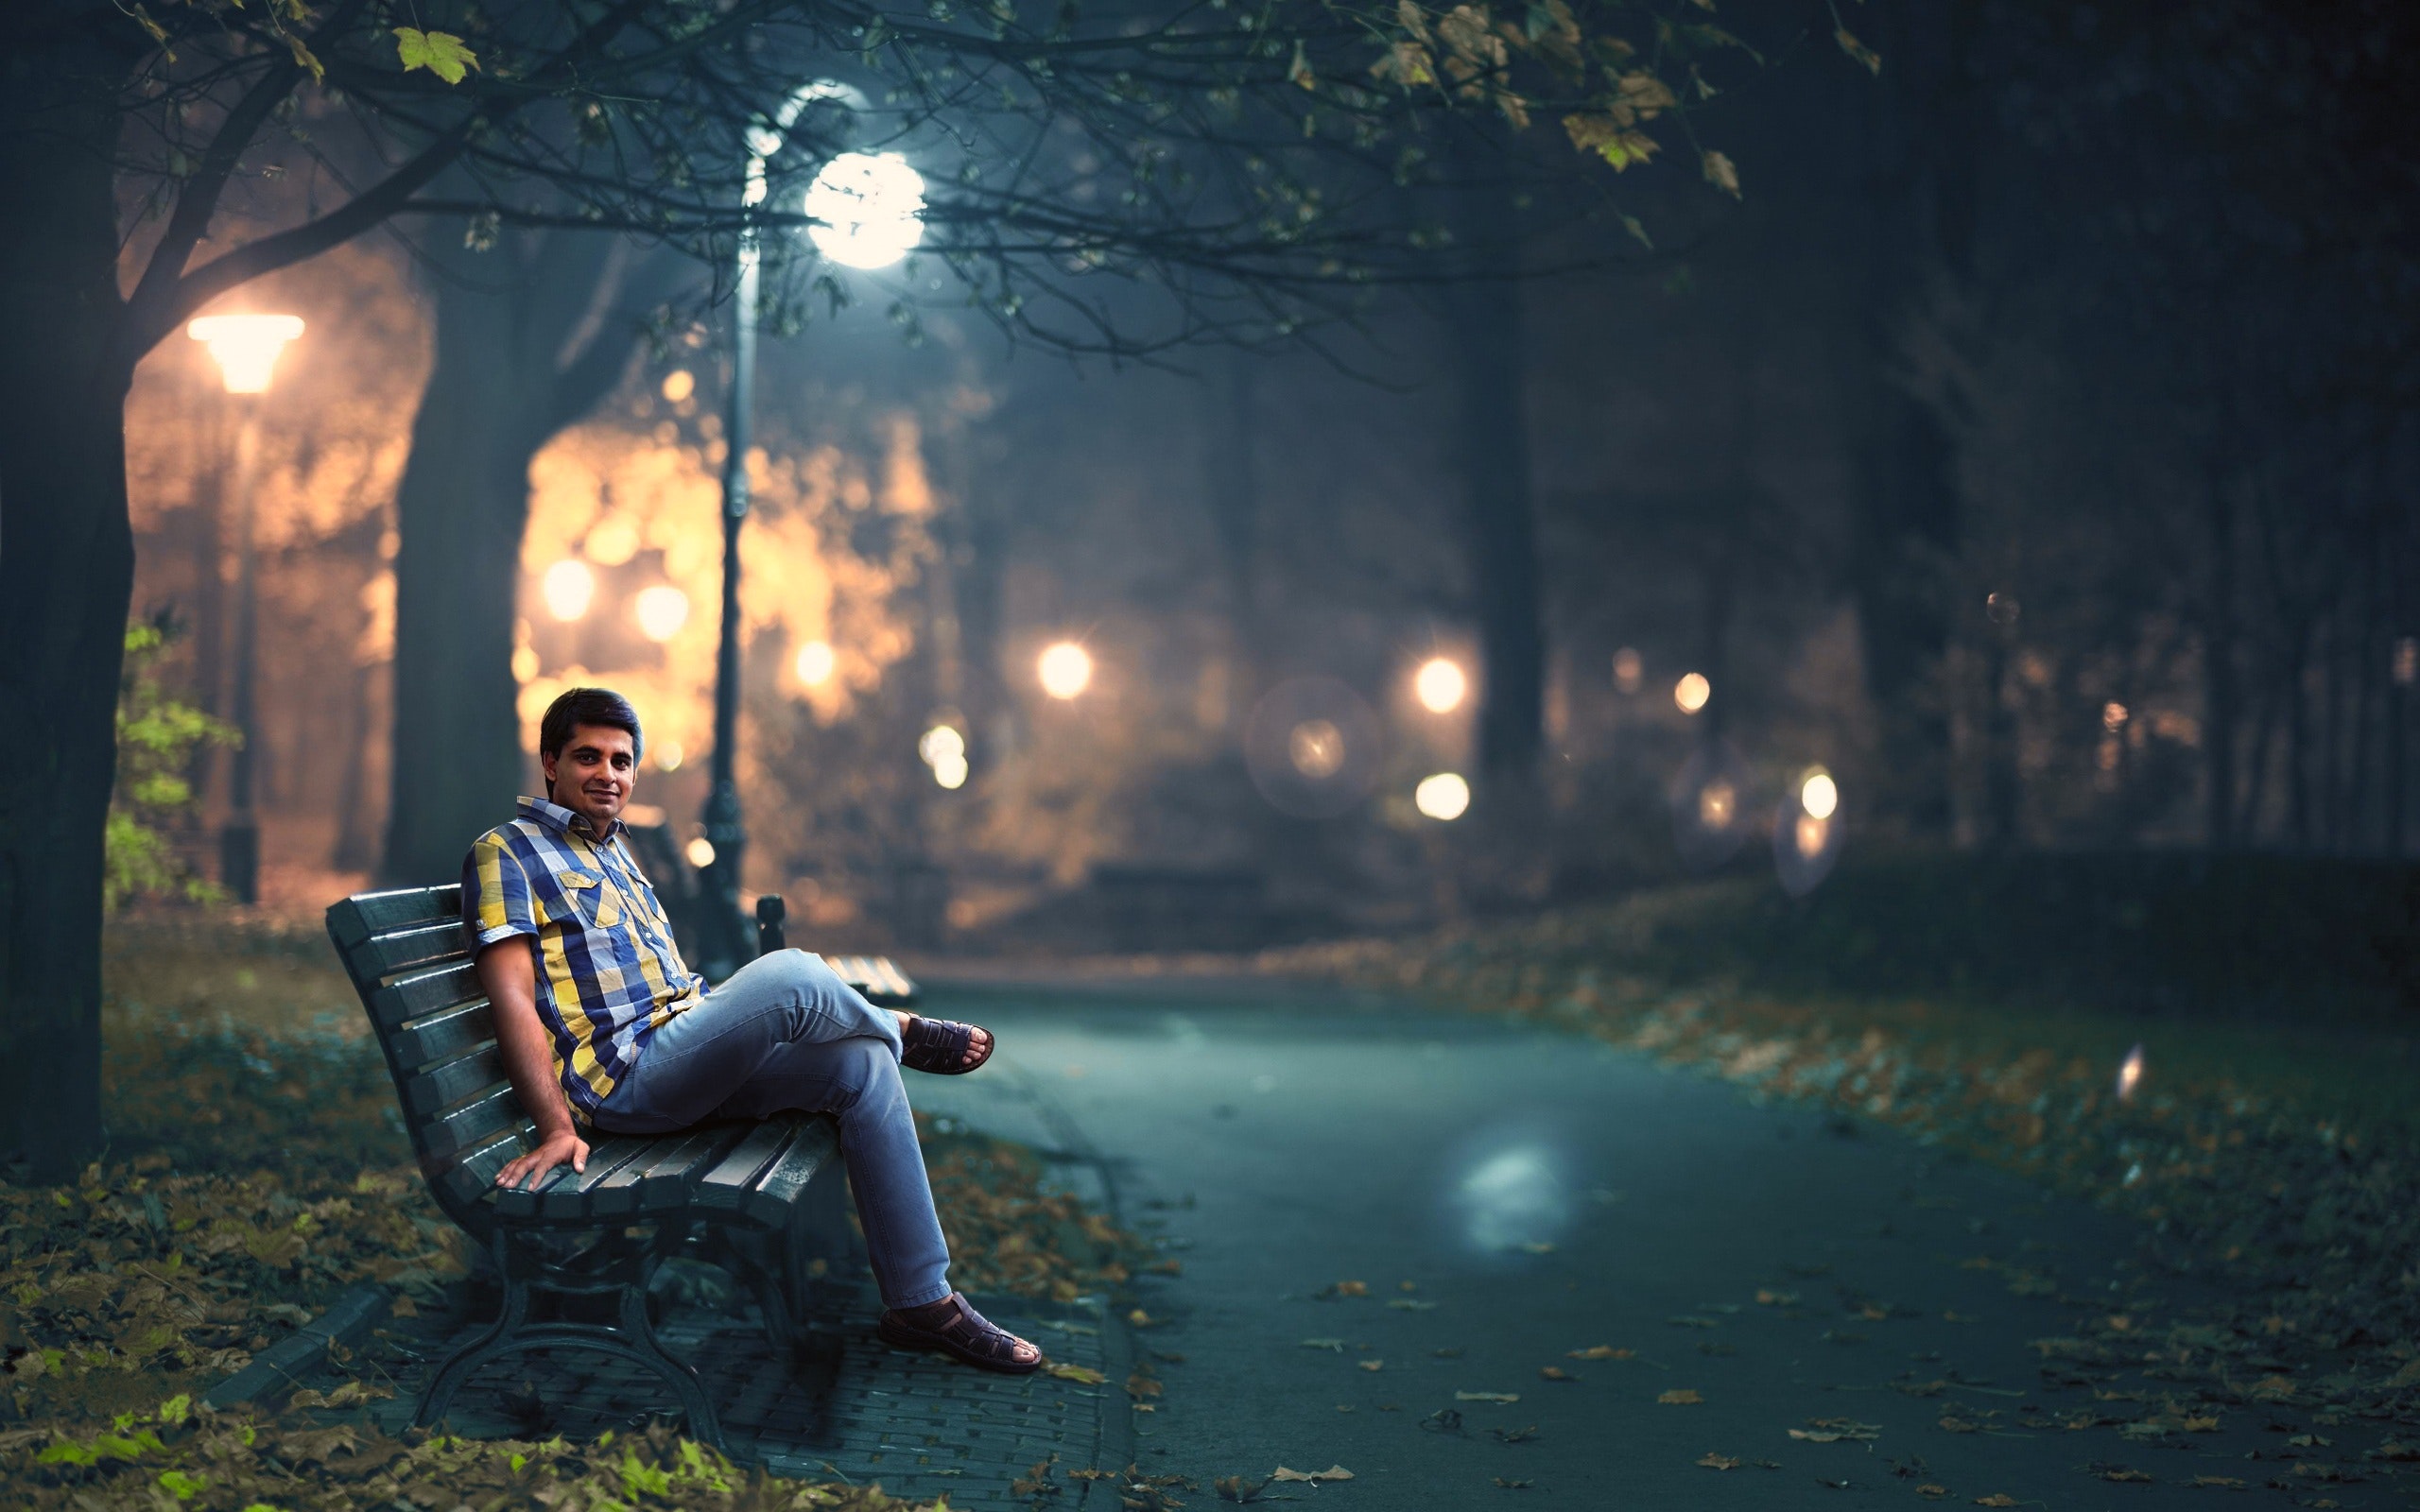 Man in blue denim jeans sitting down by wooden bench near post lamp lighted photo